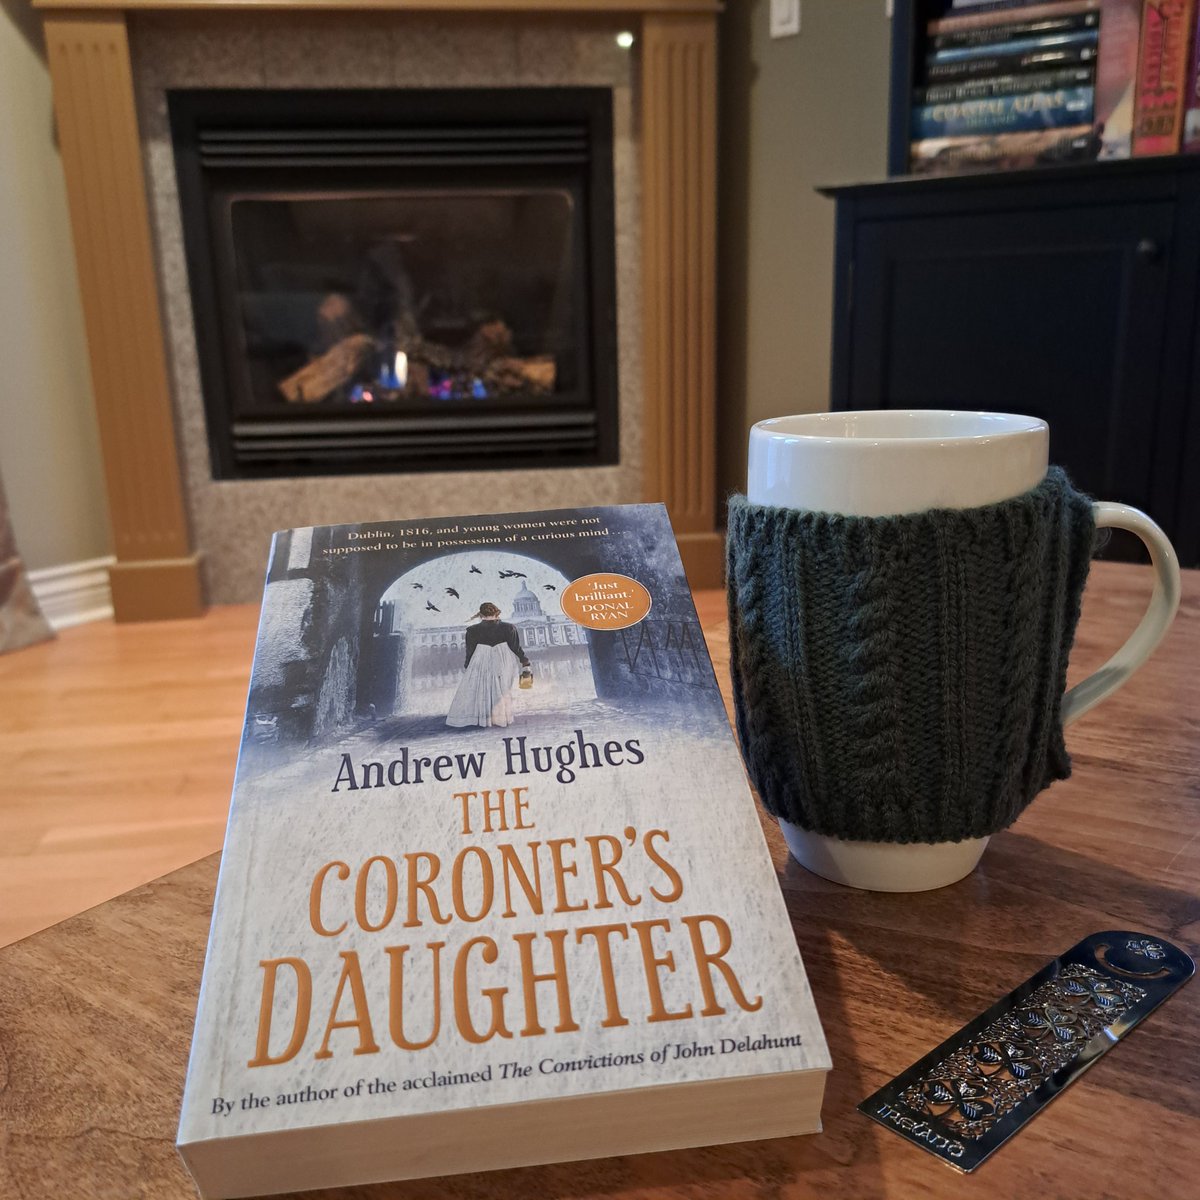 Celebrating #IrelandReads Day 25 February in snowy Vancouver - all set up to #squeezeinaread with the brilliant @1dublin1book 2023 'The Coroner's Daughter'.

I love 🇮🇪  has a national day to celebrate reading!  For book recommendations & more, check out irelandreads.ie